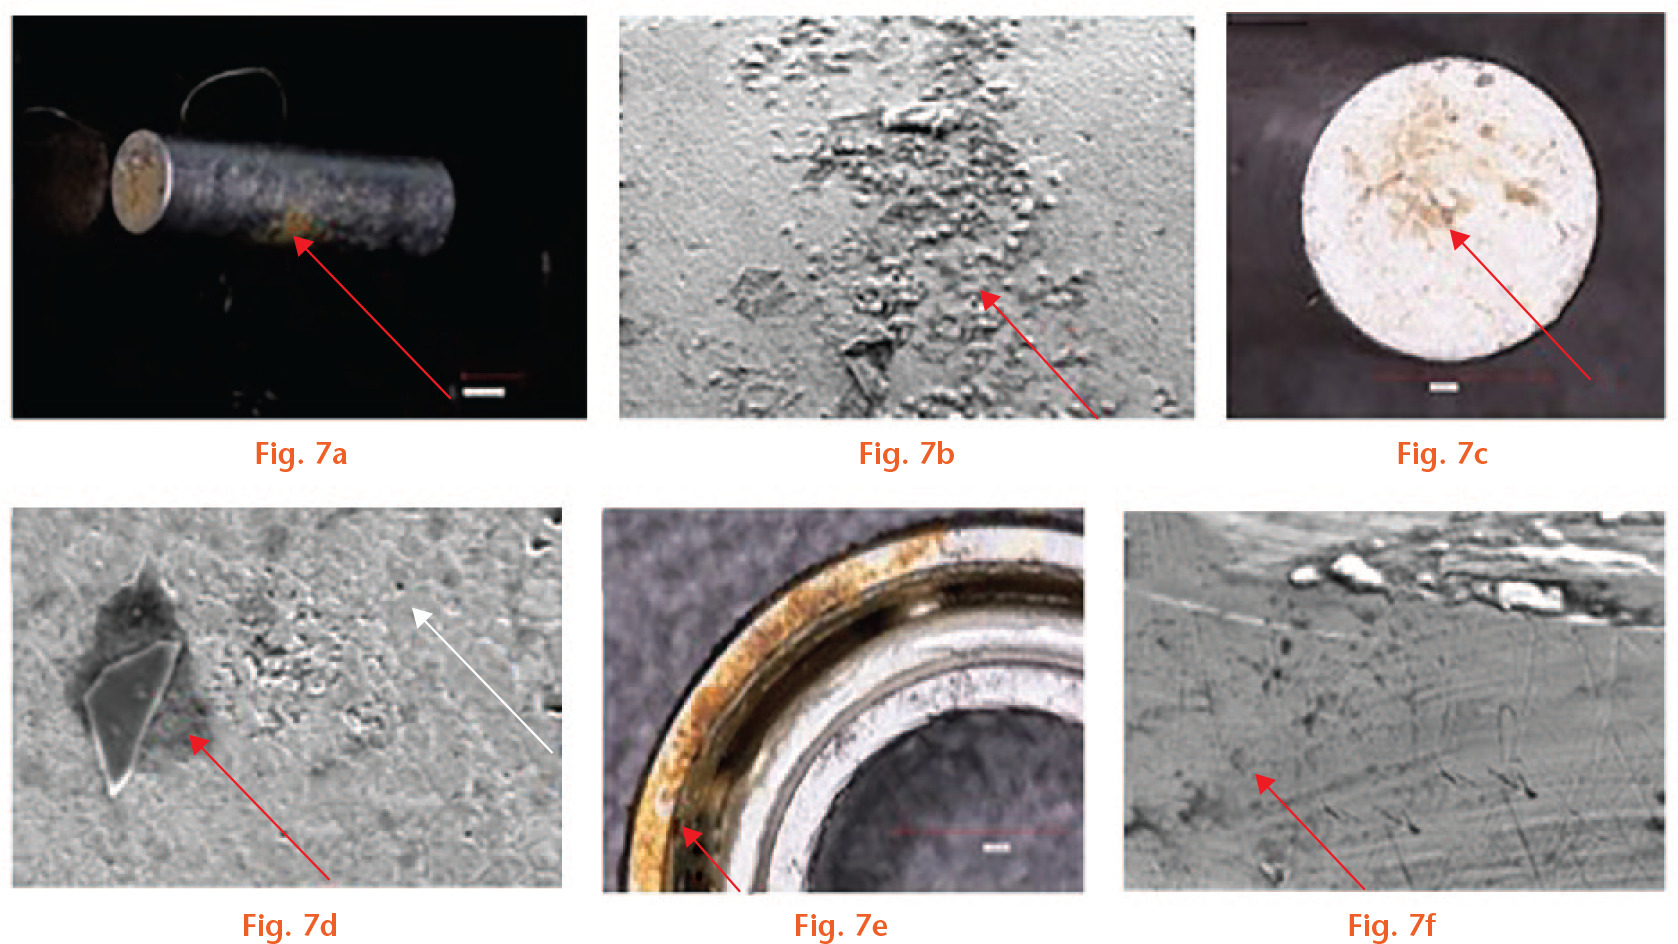  
            Microscopic inspection of internal parts of P2. a) Foreign material on the pin (arrow) while b) scanning electron microscopy (SEM) showed no presence of black debris, only biological deposits on the side. c) Minor presence of black debris on the top of the pin (arrow), while d) SEM showed some black debris (red arrow) and pitting corrosion (white arrow). e) Ball bearing with debris and deposits (arrow), which f) under SEM inspection revealed presence of black debris (arrow).
          